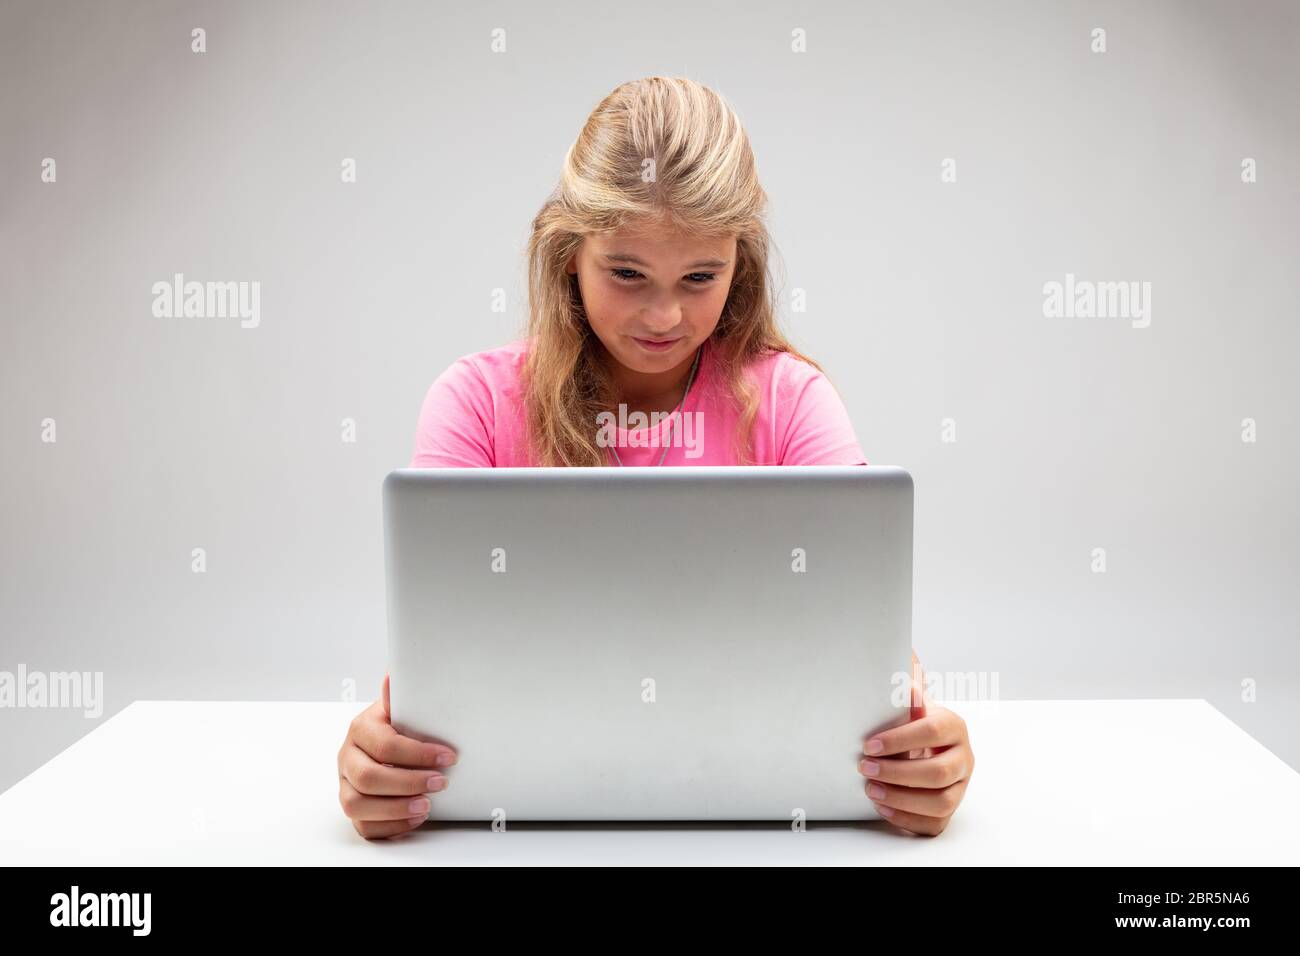 Young blond girl looking at her laptop with distaste grimacing in revulsion as she holds the screen with both hands seated at a small white table Stock Photo